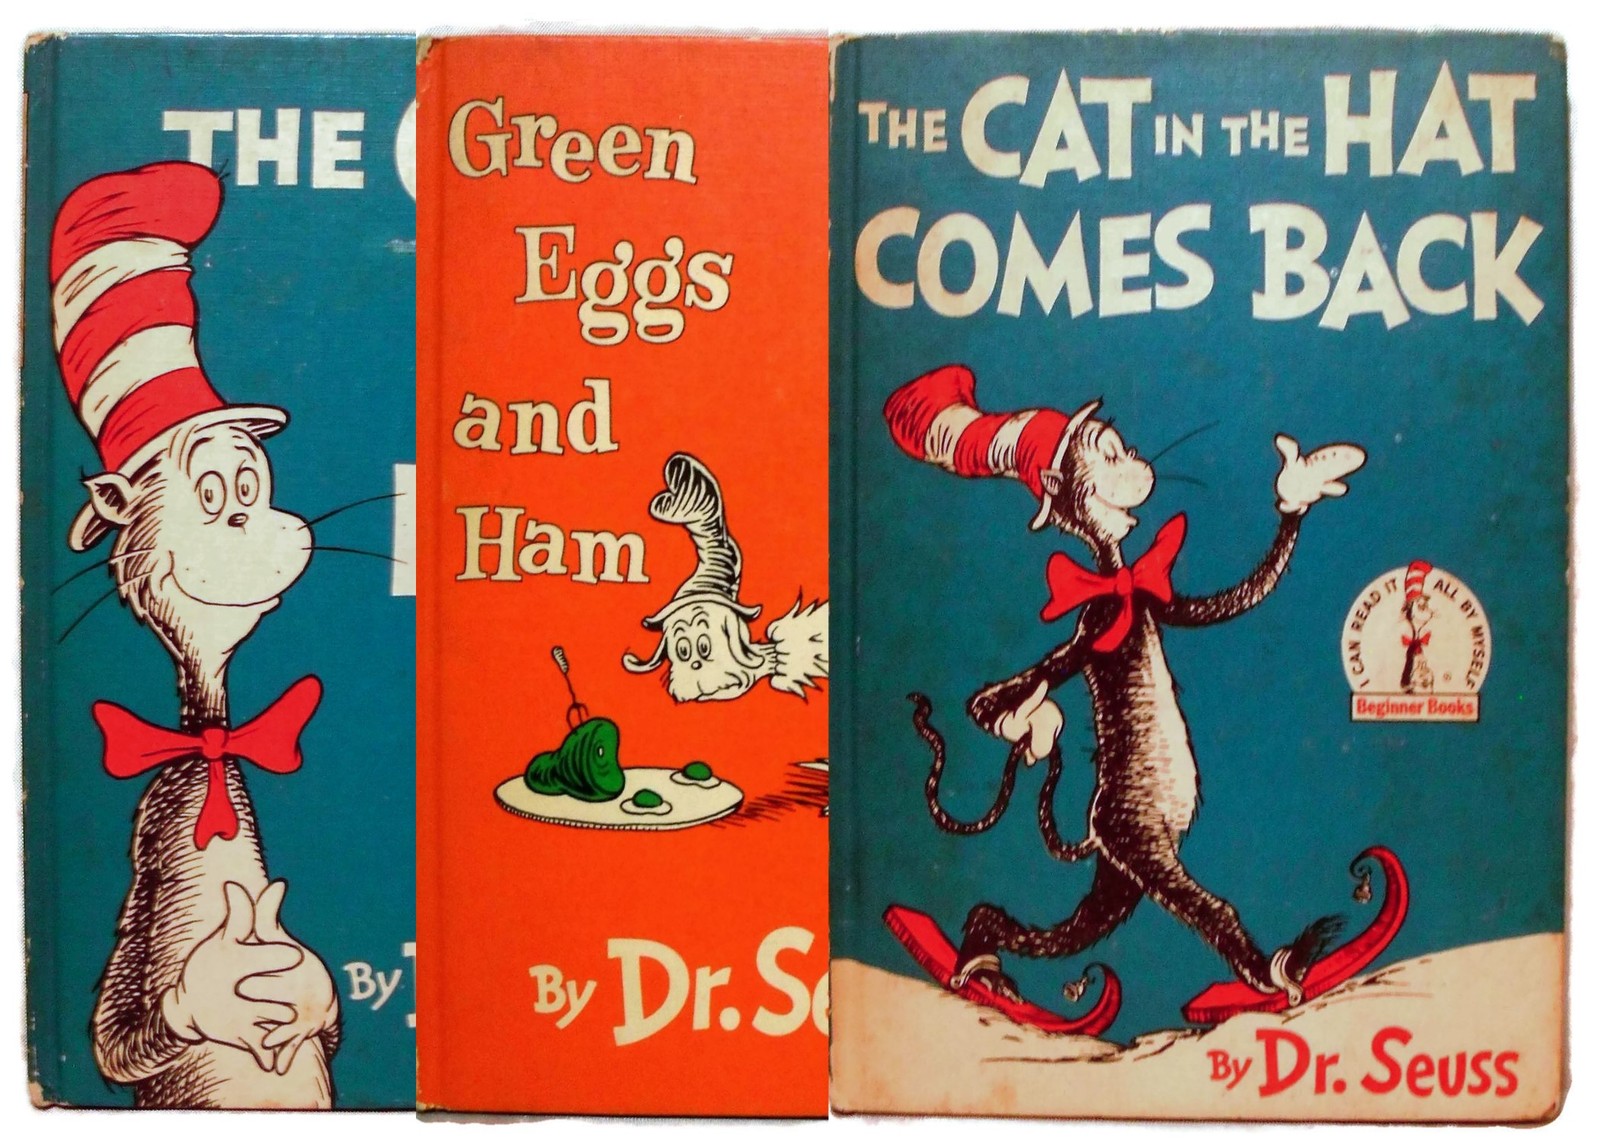 1958 the cat in the hat comes back